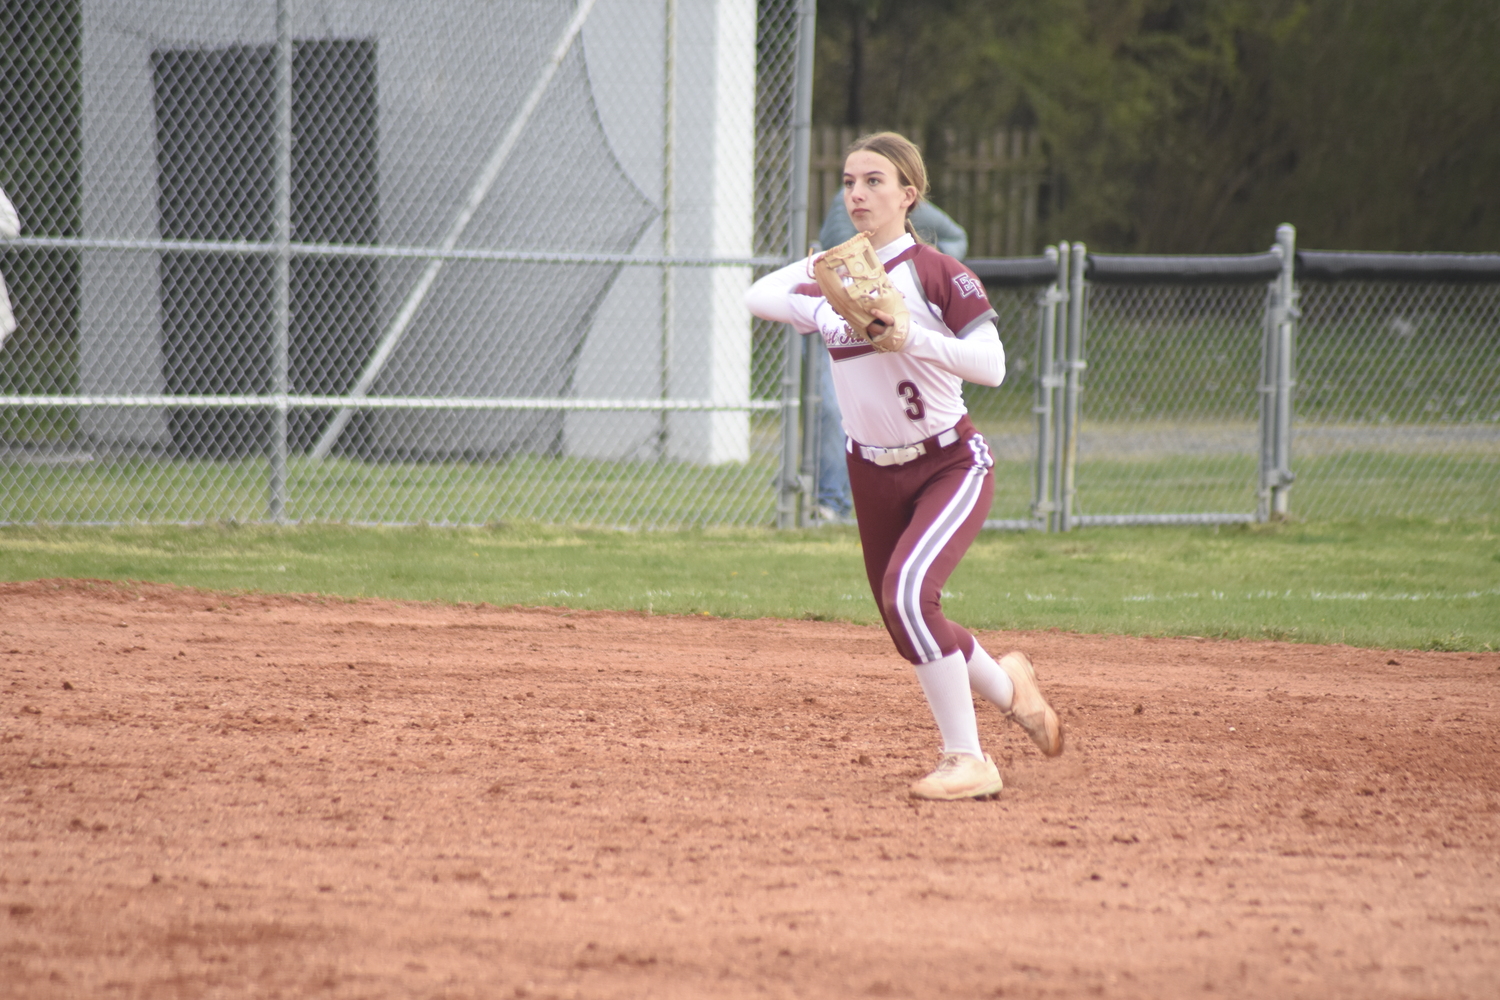 East Hampton sophomore shortstop Olivia Dodge throws to first for an out. DREW BUDD